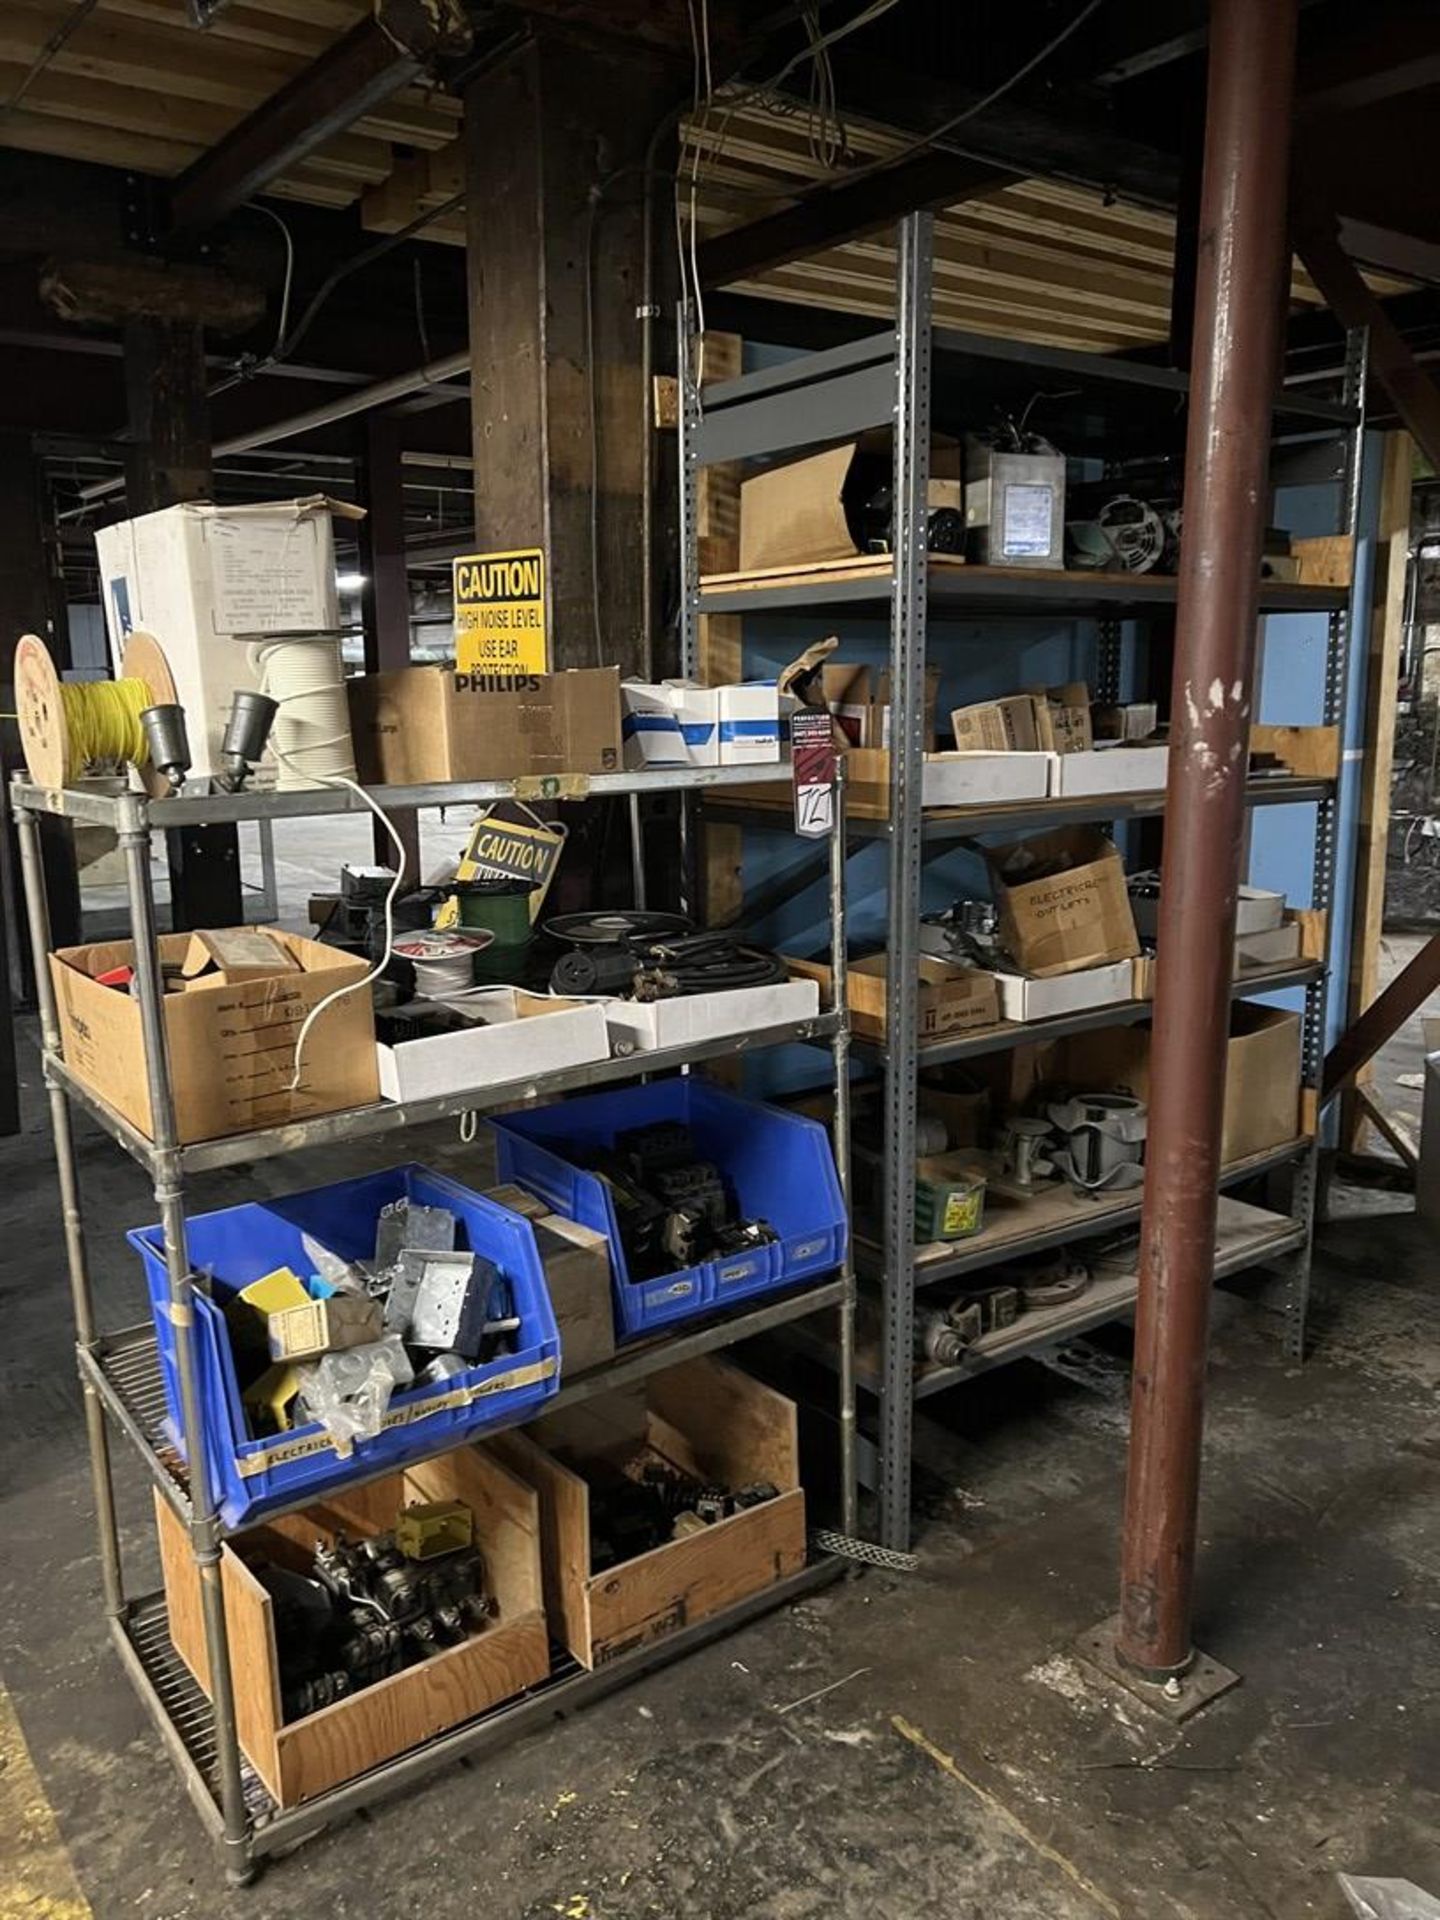 Lot of (2) Shelving Units w/ Assorted Electrical Supplies Including Fuses, Boxes, Motors, and